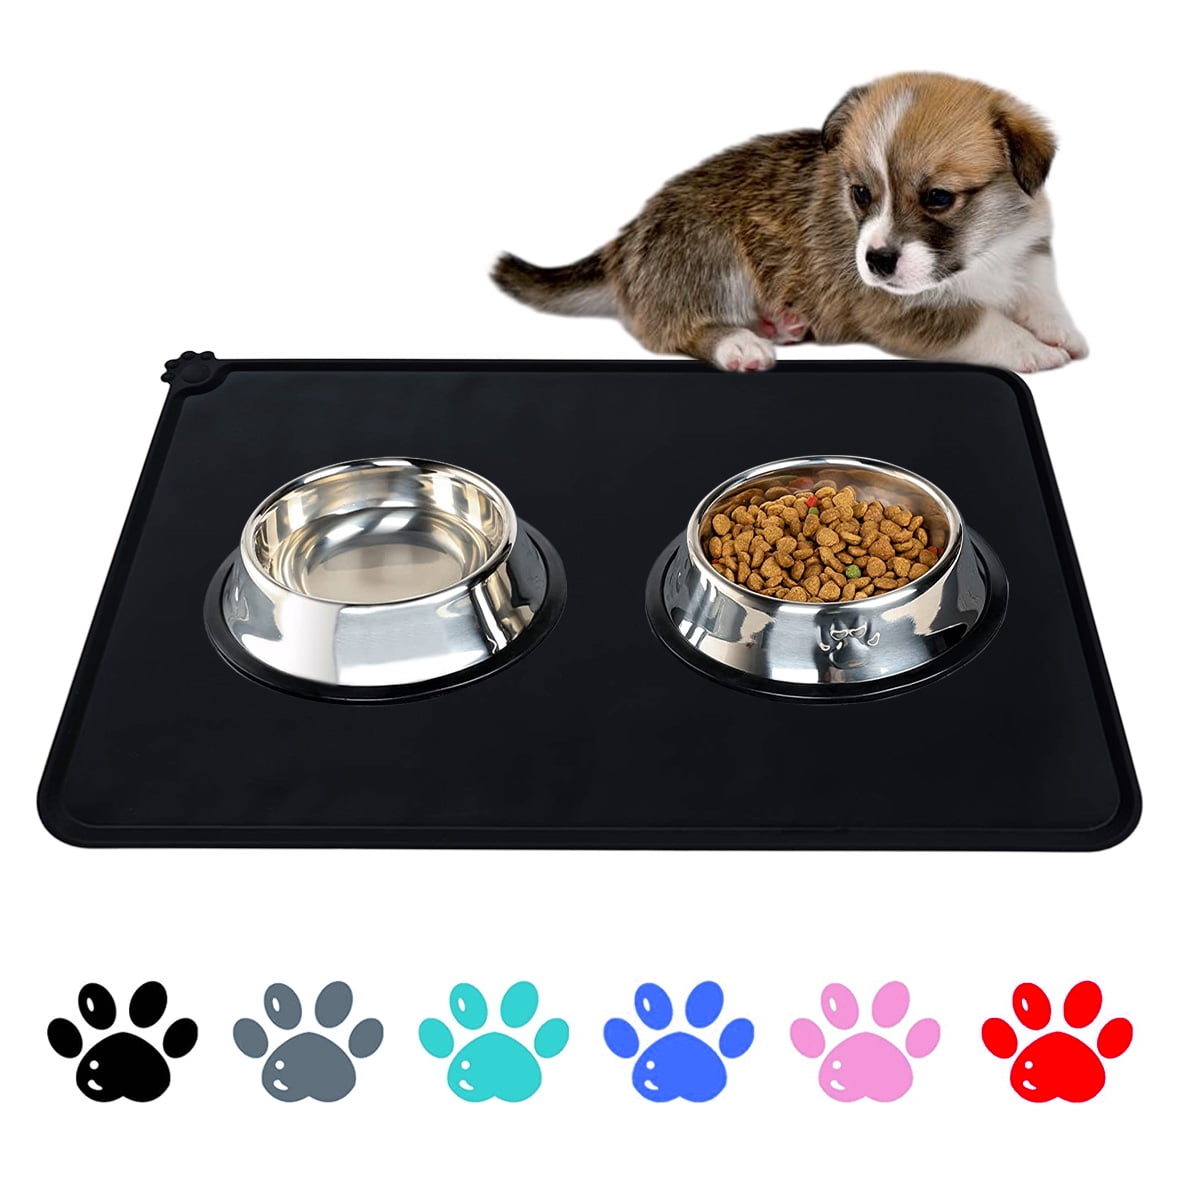 Dog Food Silicone Mat - Doggy Style Puppy Accessories